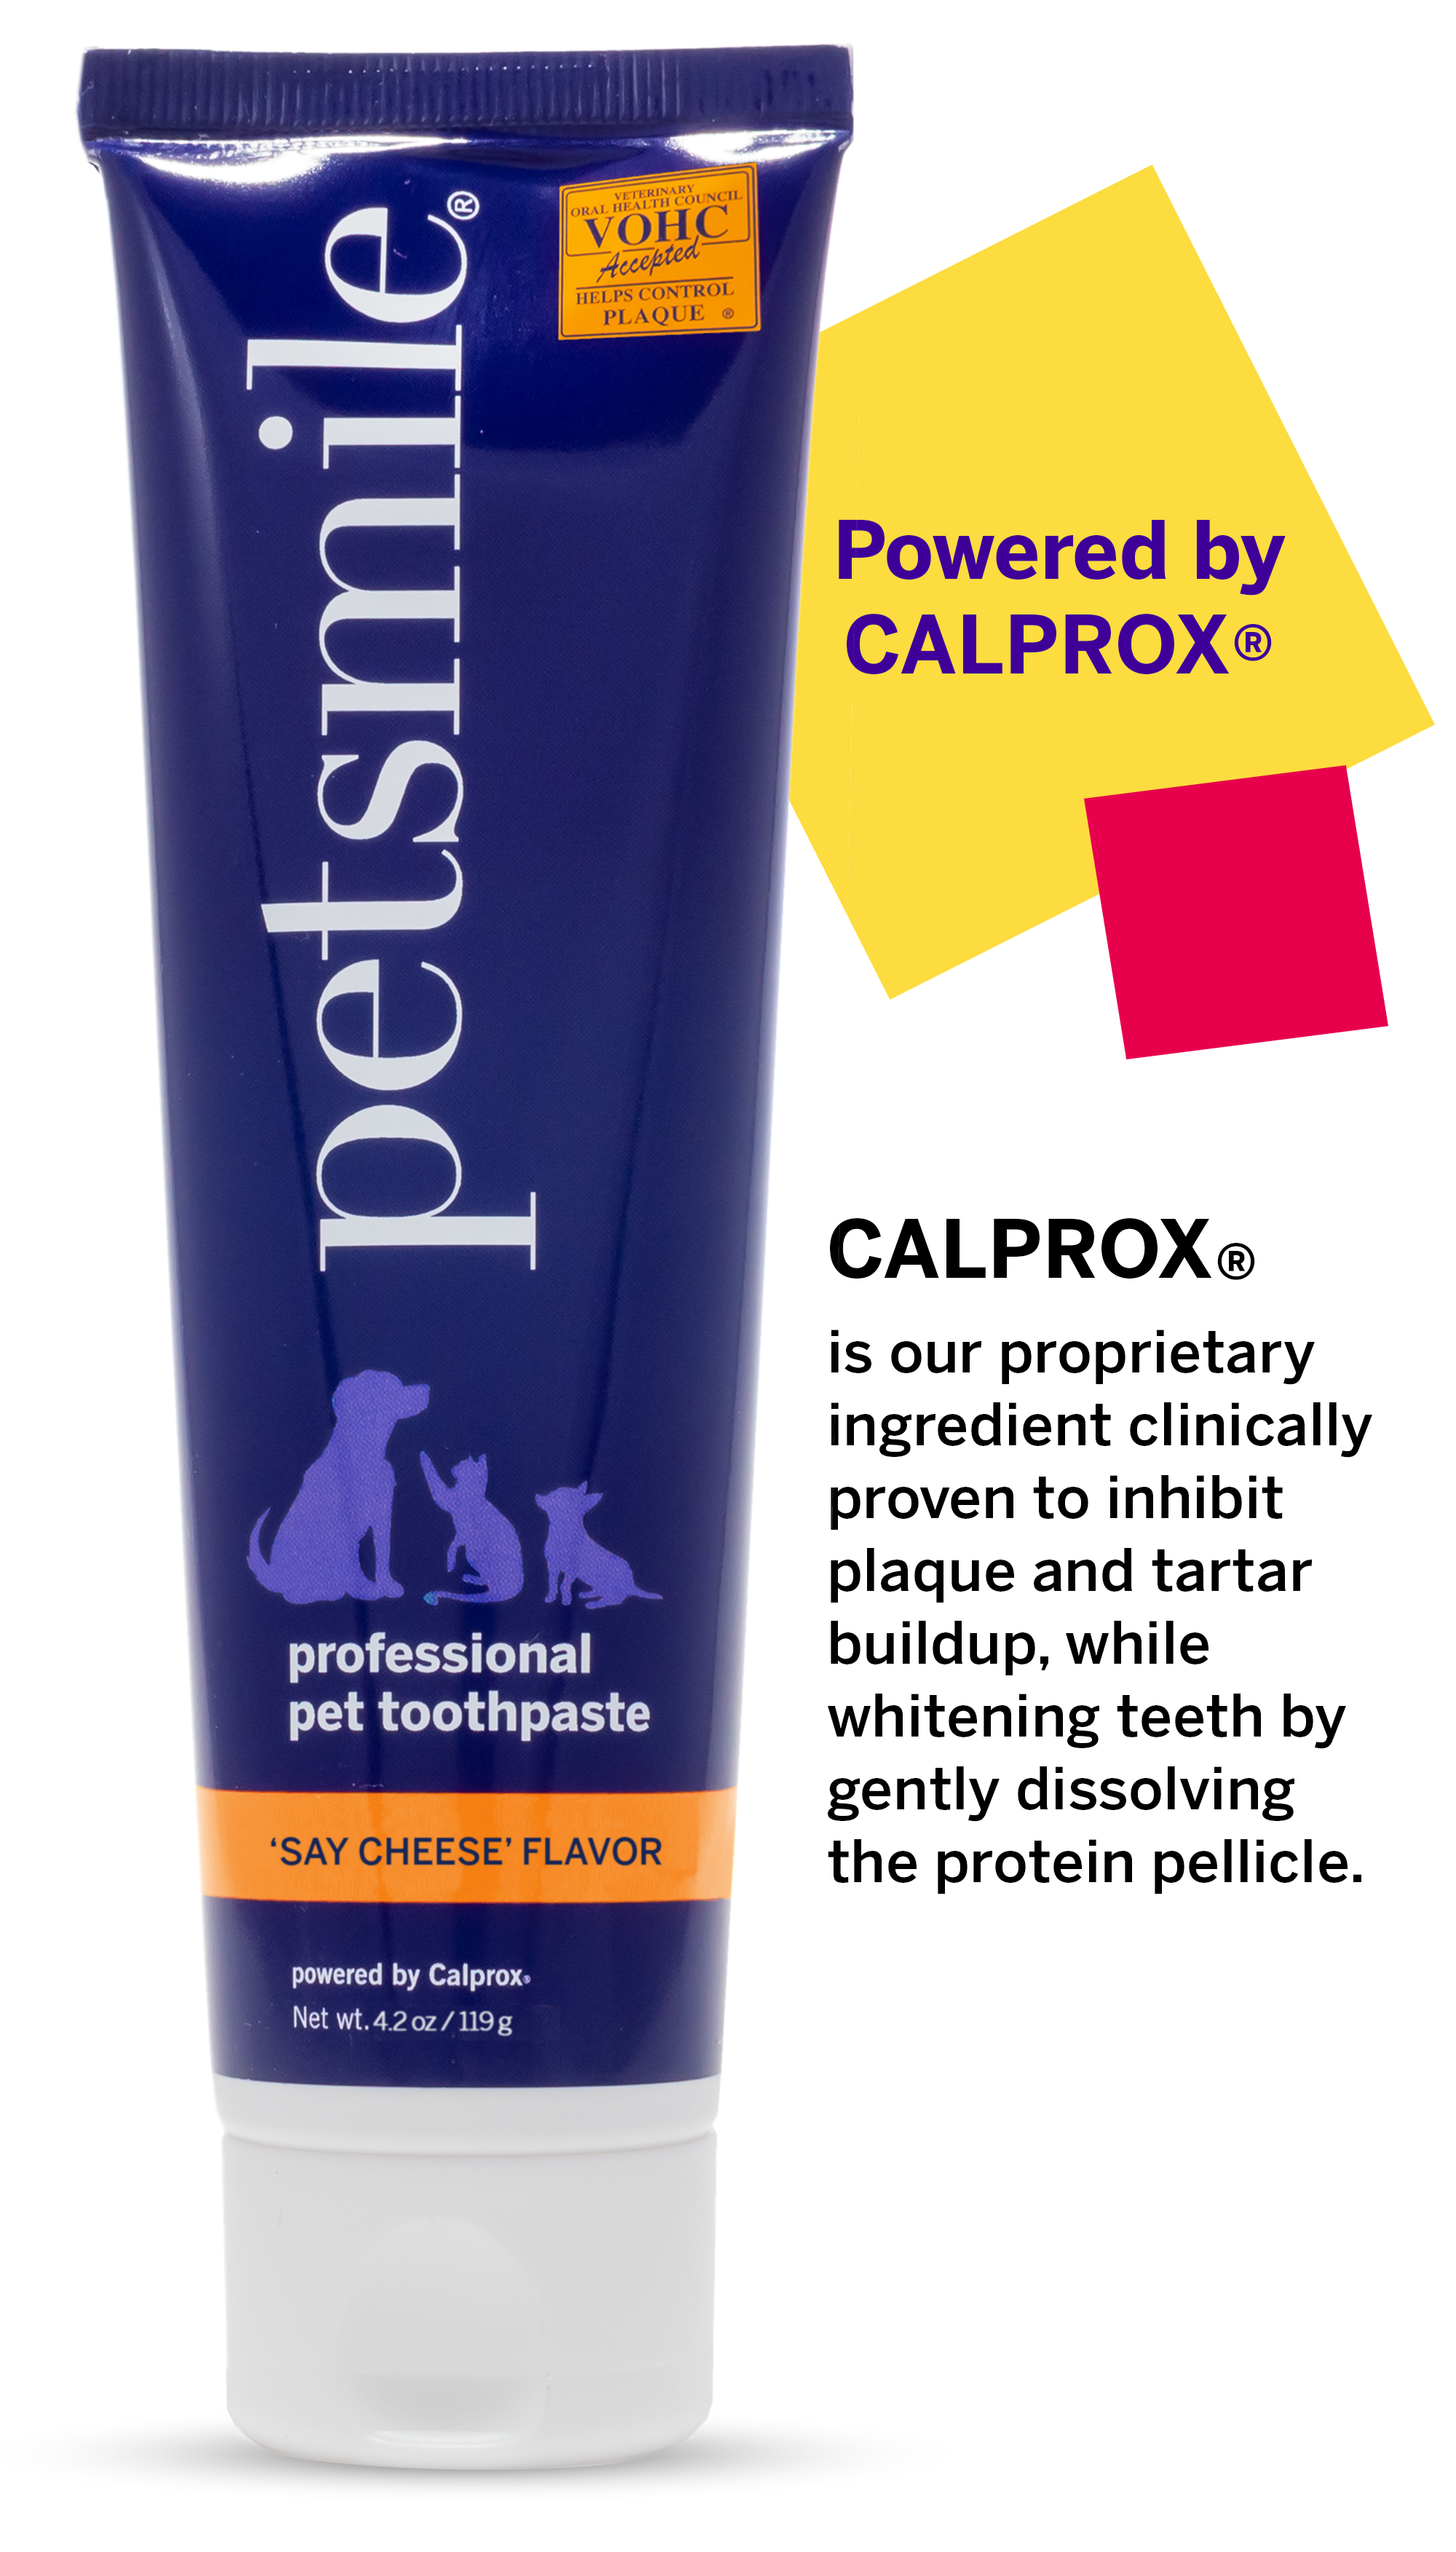 Large petsmile toothpaste with Calprox , Large puruple tube of cheese flavor dog  toothpaste , 4.2 OZ of petsmile professional dog toothpaste , Natural ingredients, Calprox powered , Clinically proven, Say Cheese flavor , Large tube, unbelievable results